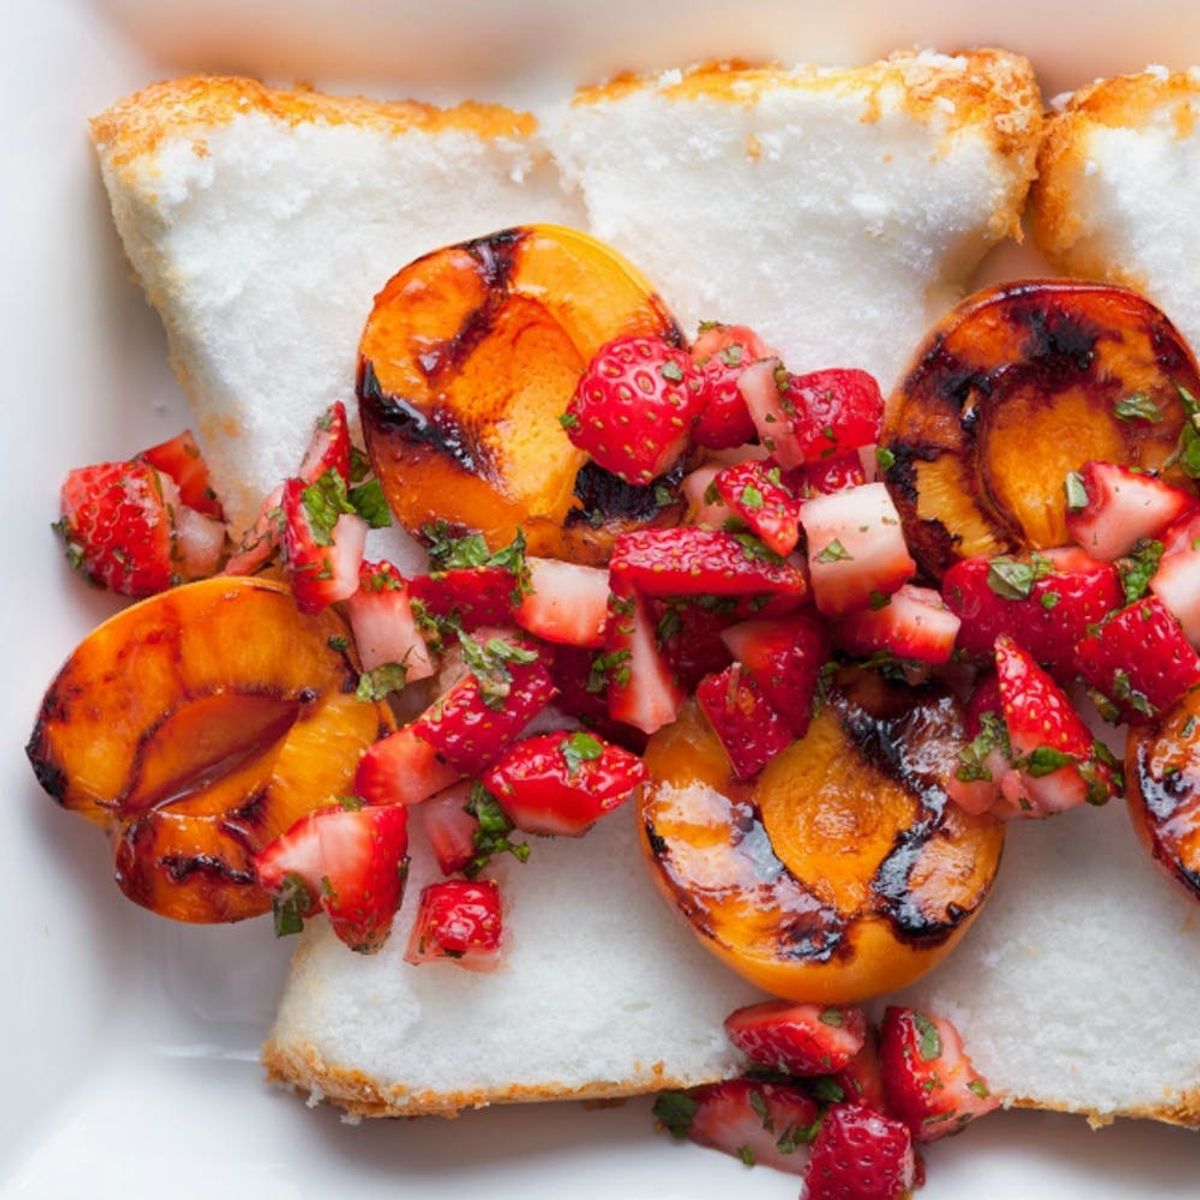 Psst, These 20 Dessert Recipes Are Loaded With Herbs